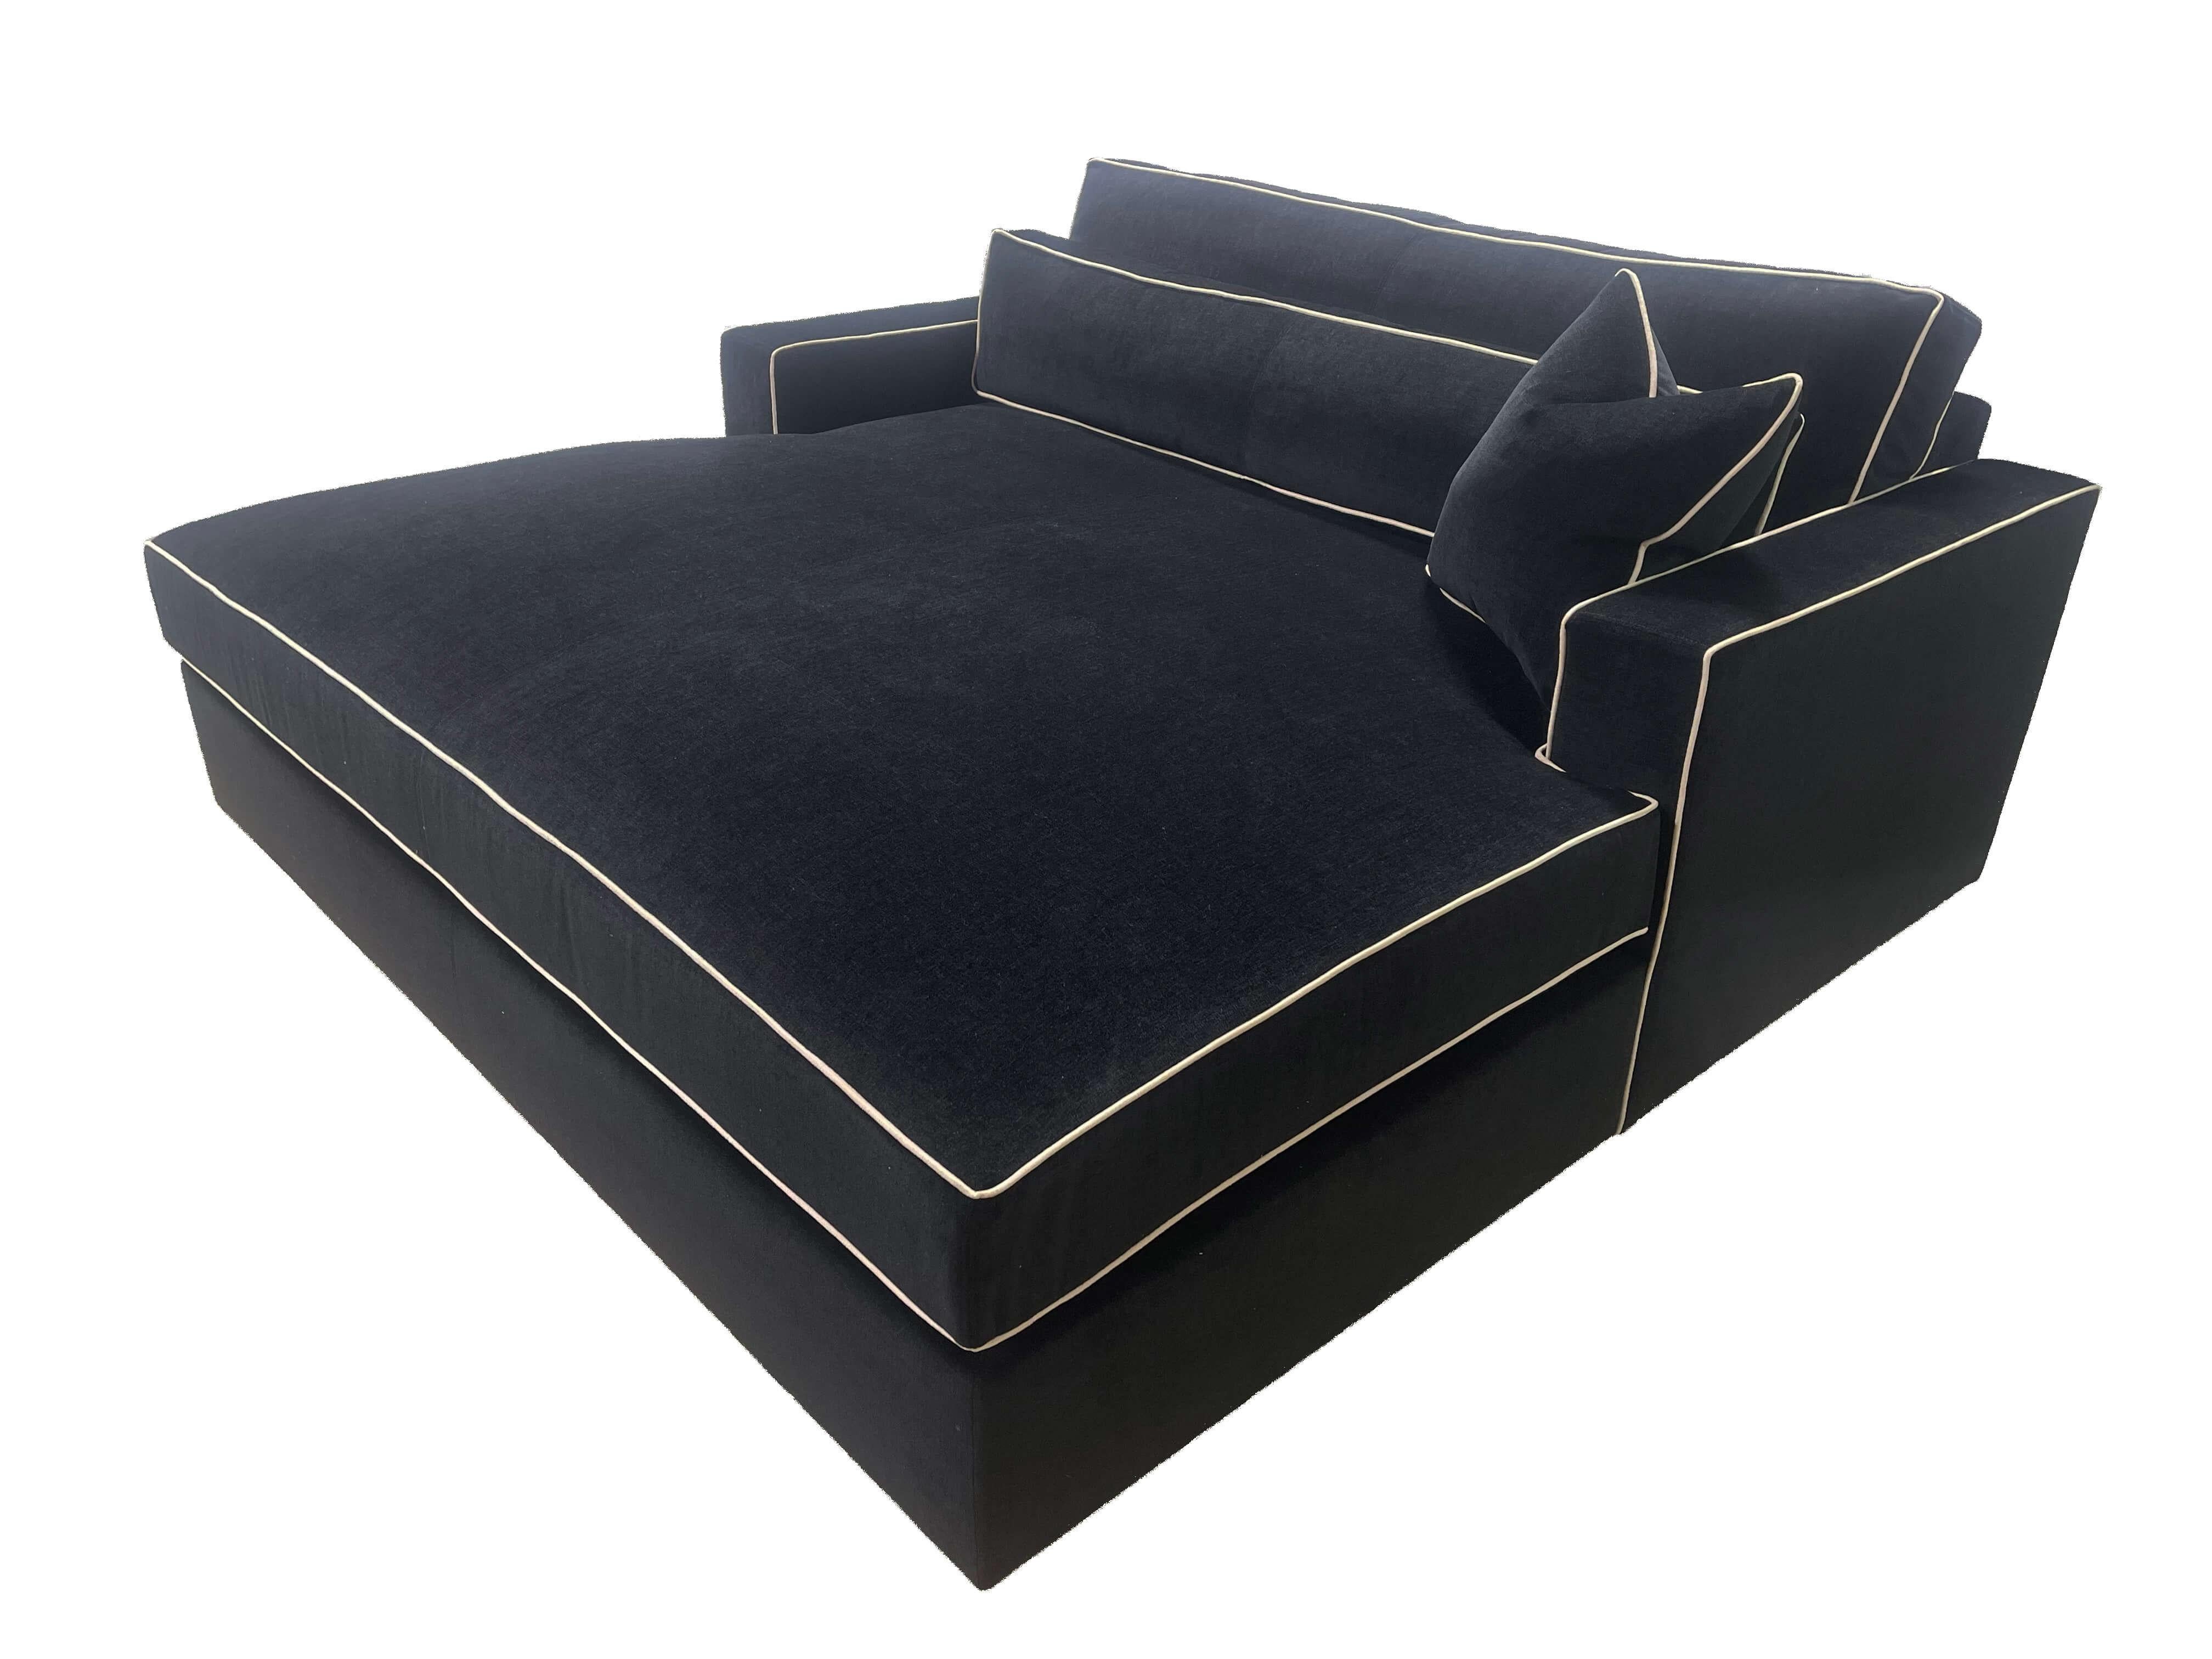 Stylish yet extremely comfortable. The Model One Daybed is the perfect choice for a Cabana, TV room, Lounge Room, Guest Room, etc. Custom Sizes available! Standard pipping is optional.